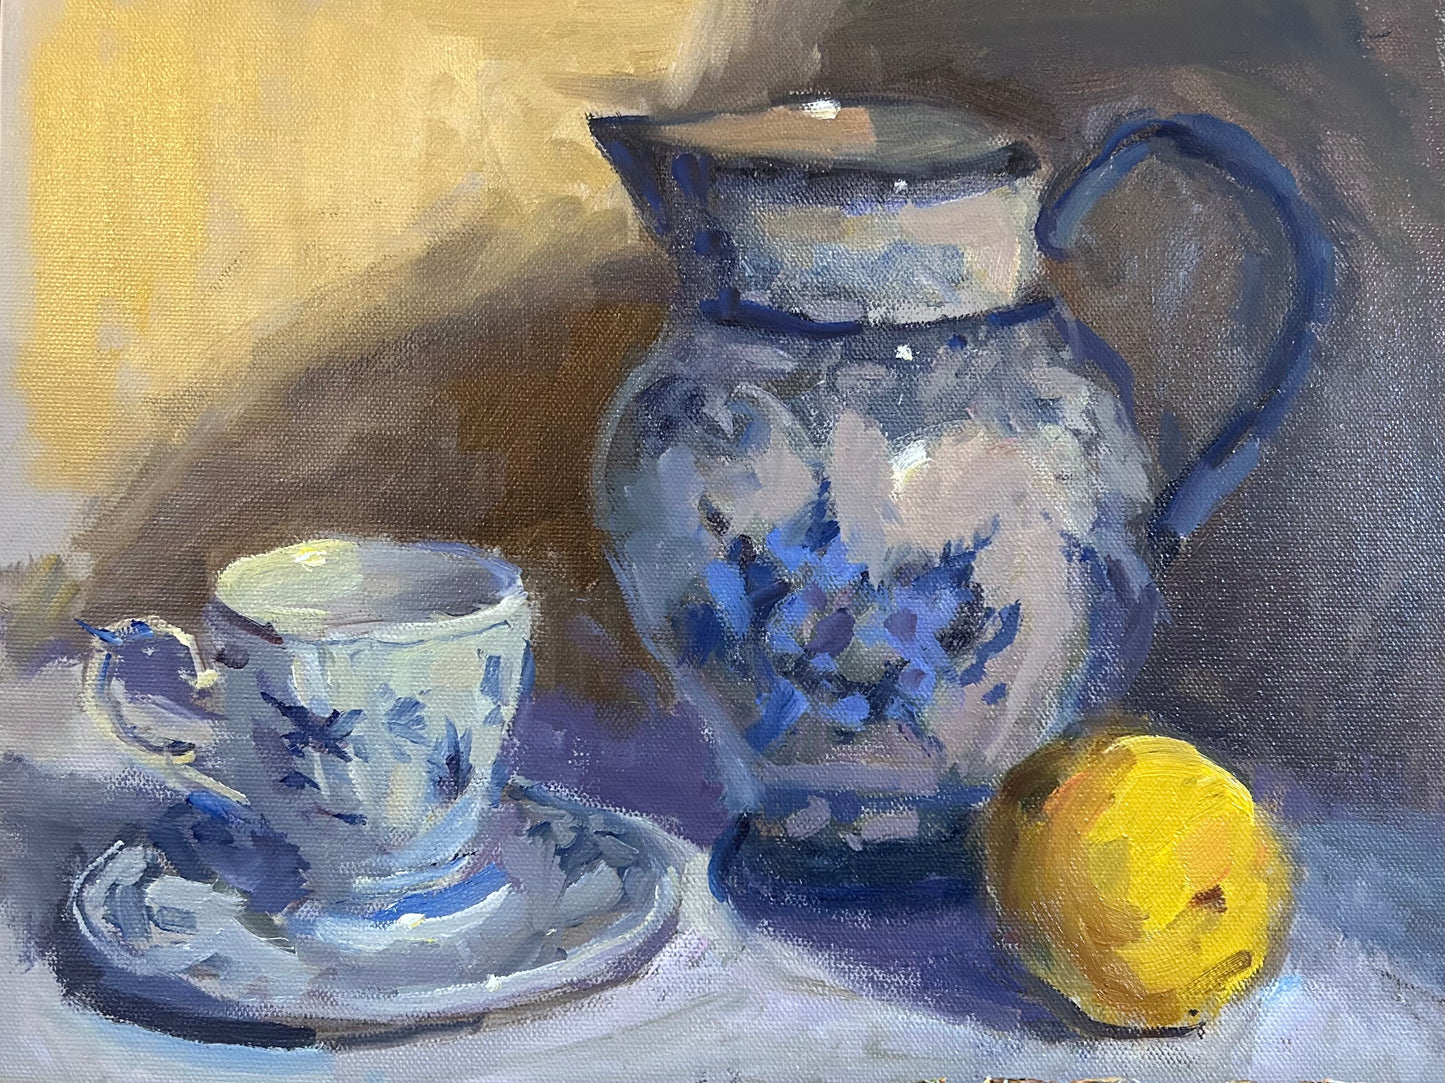 Blue and White Pitcher and Teacup (11 x 14 Inches)